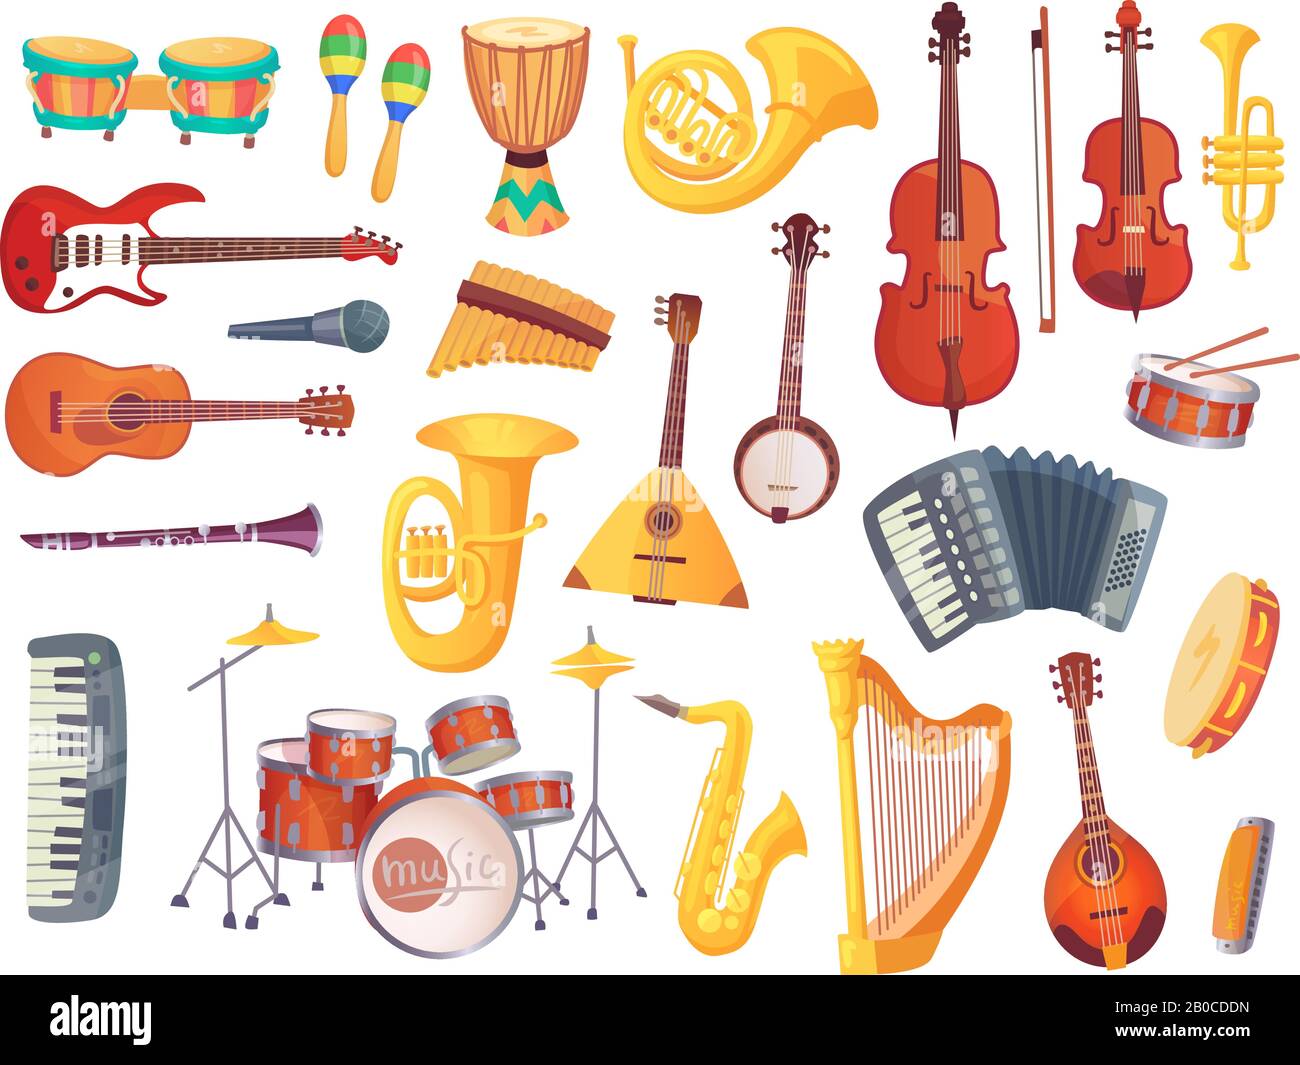 Cartoon musical instruments, guitars, bongo drums, cello, saxophone, microphone, drum kit isolated. Music instrument vector collection Stock Vector